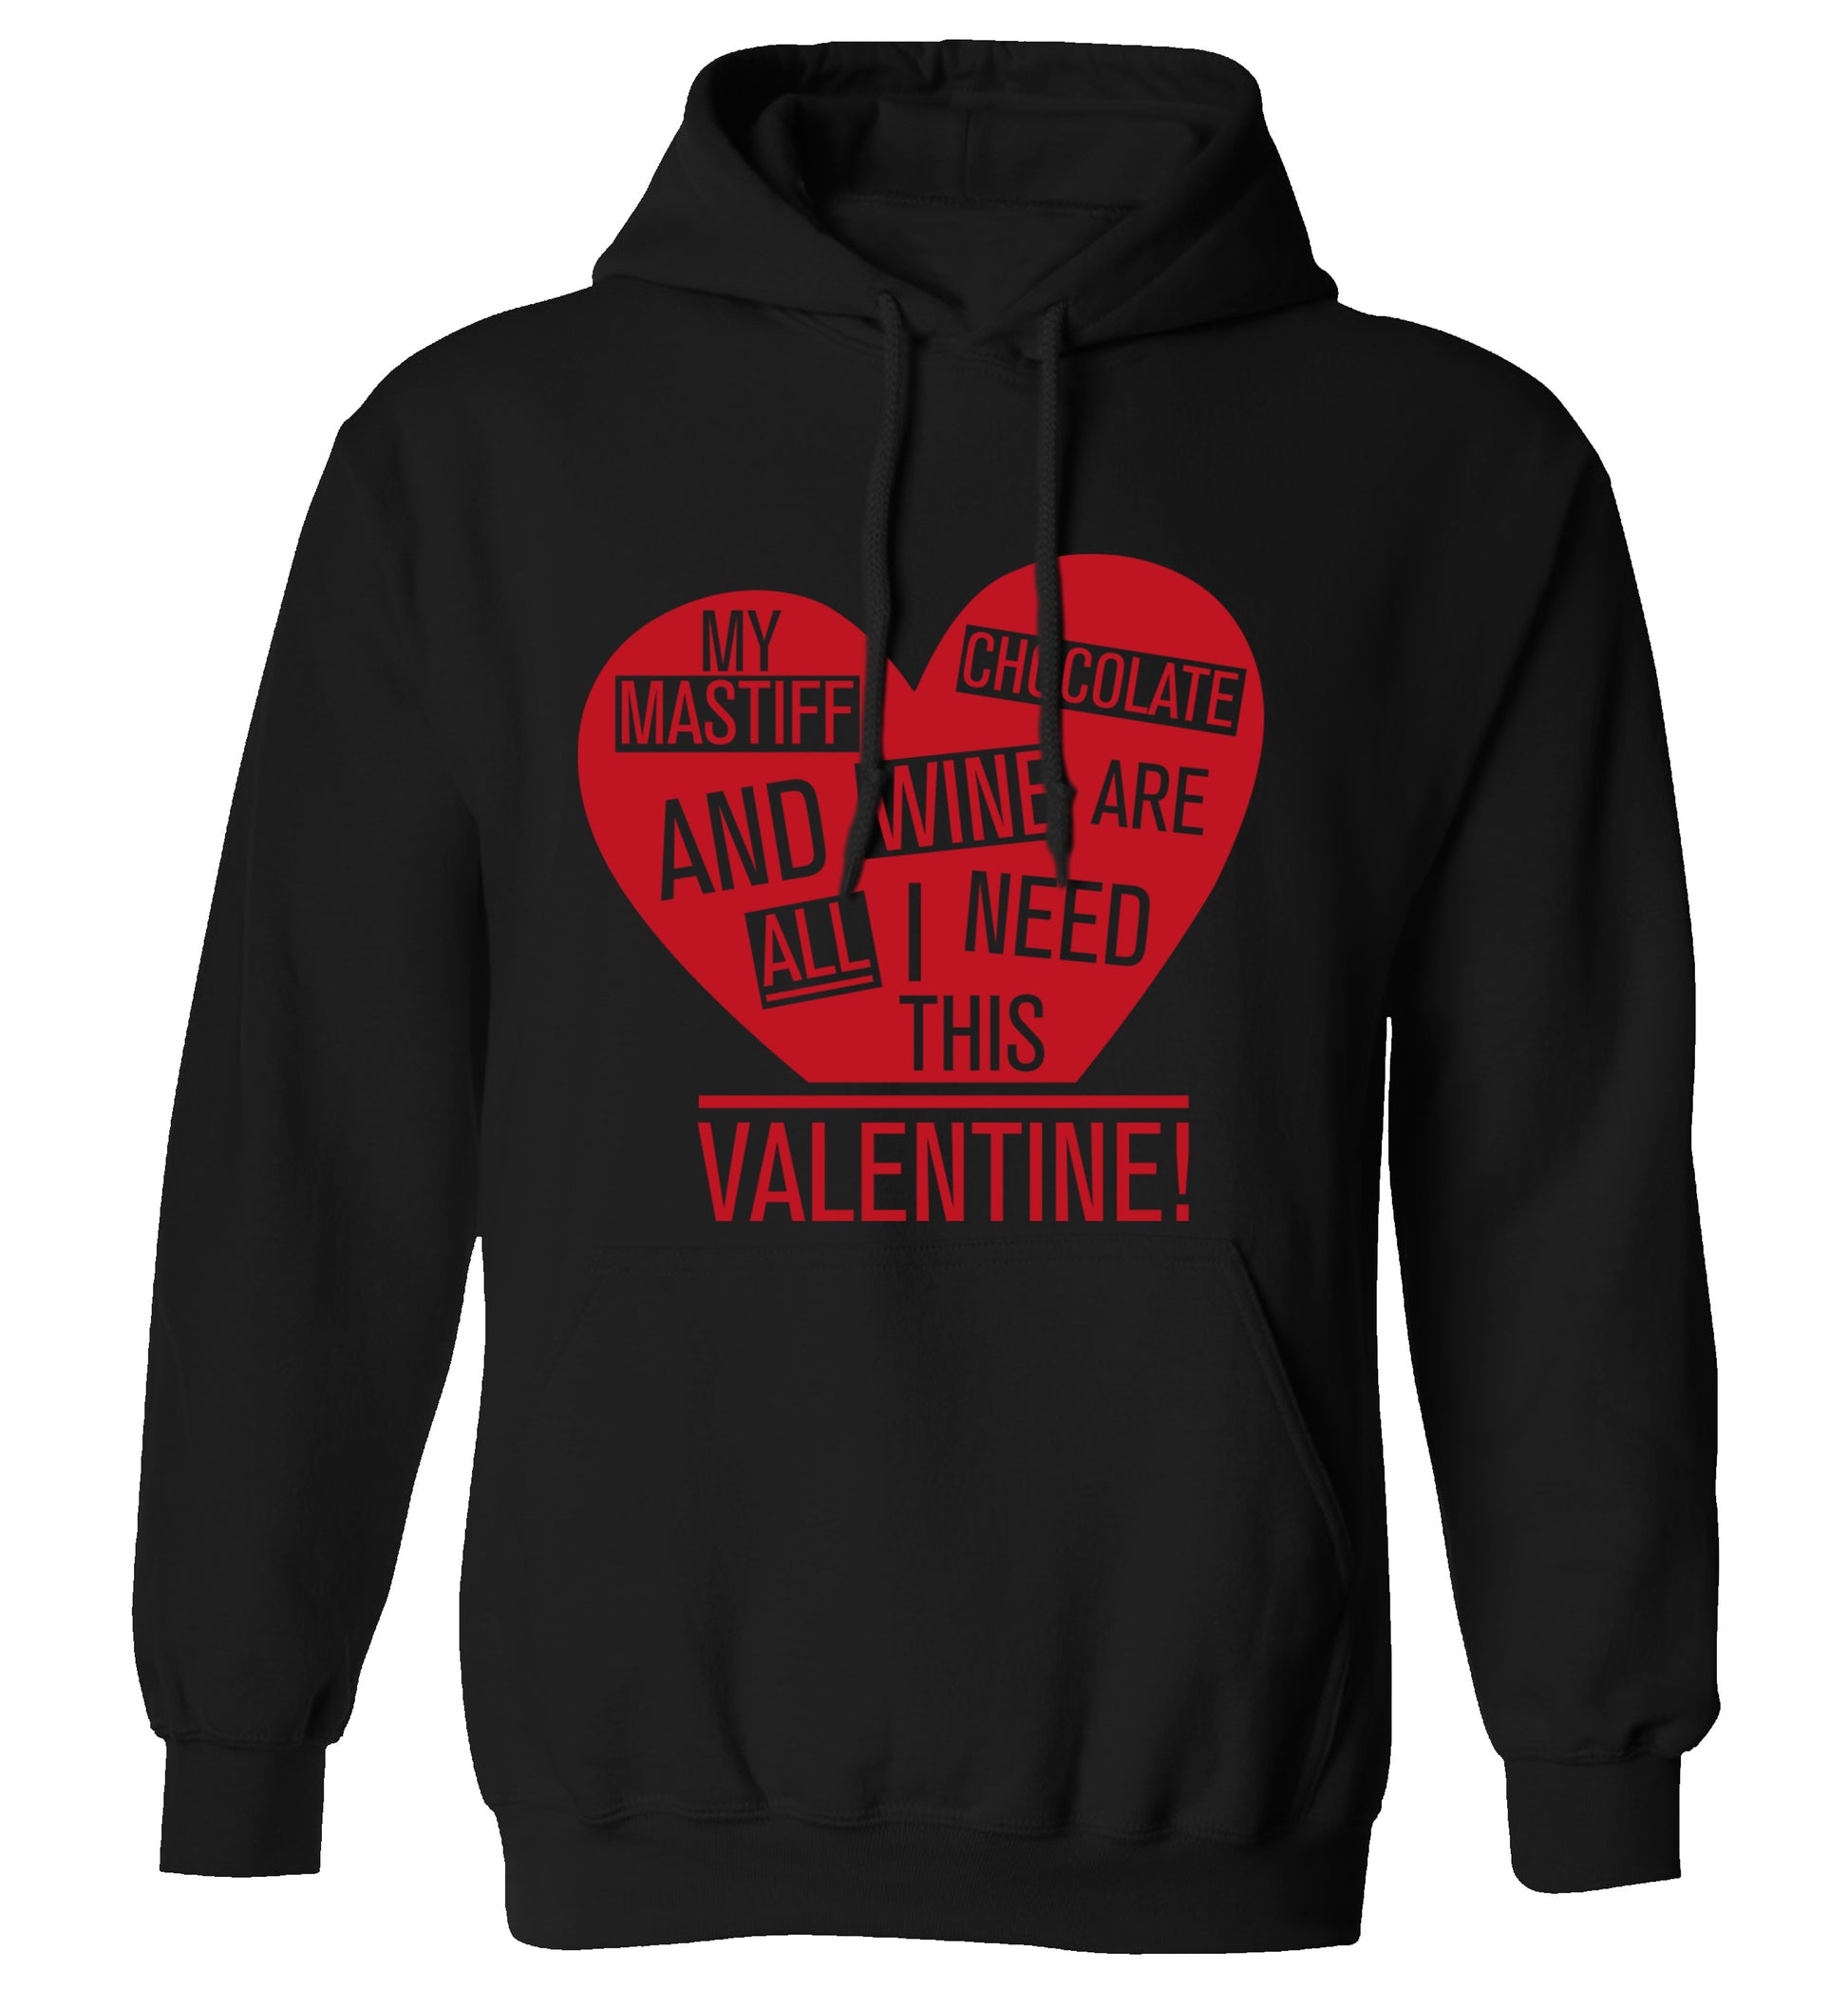 My mastiff, chocolate and wine are all I need this valentine! adults unisex black hoodie 2XL